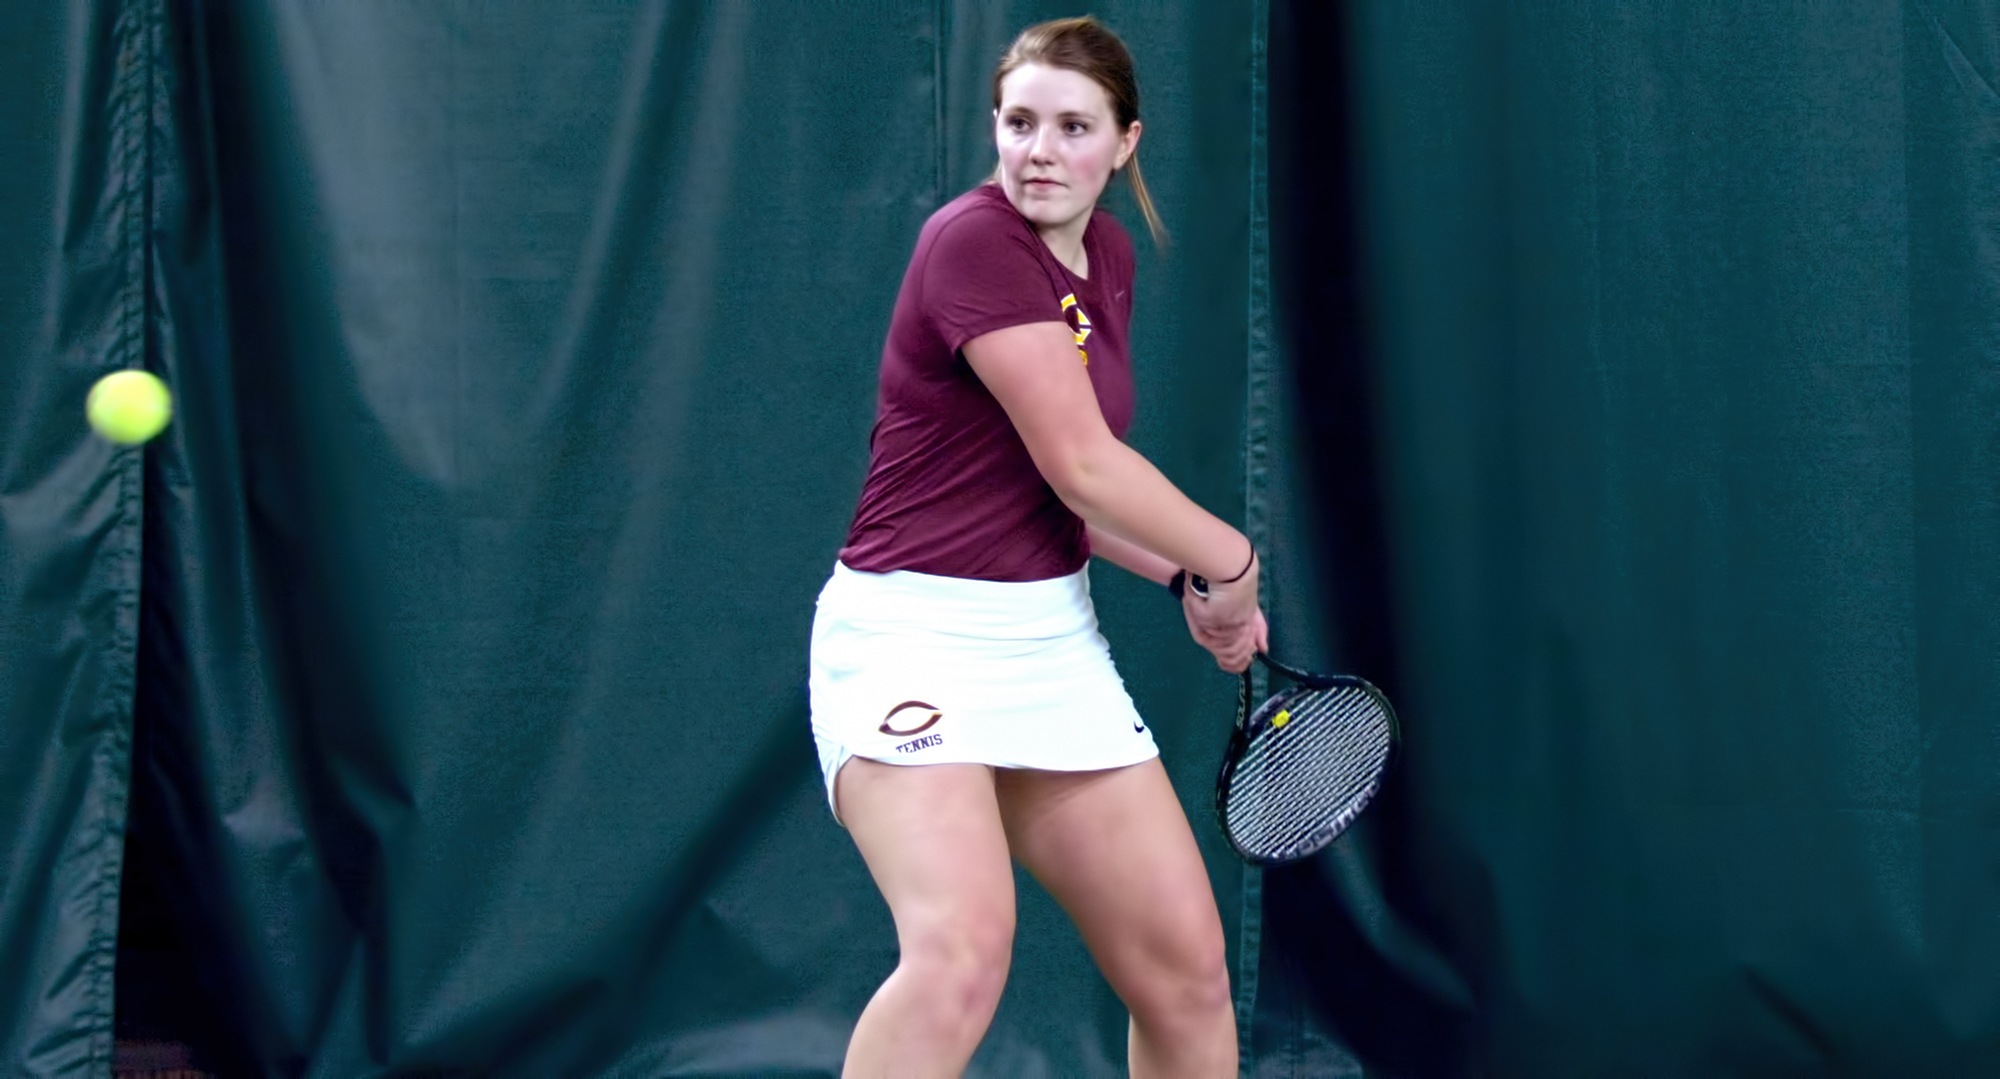 Junior Kendra Stoick rallied from losing the first set to win at No.1 singles in the Cobbbers' 8-1 victory at Minn.-Morris.